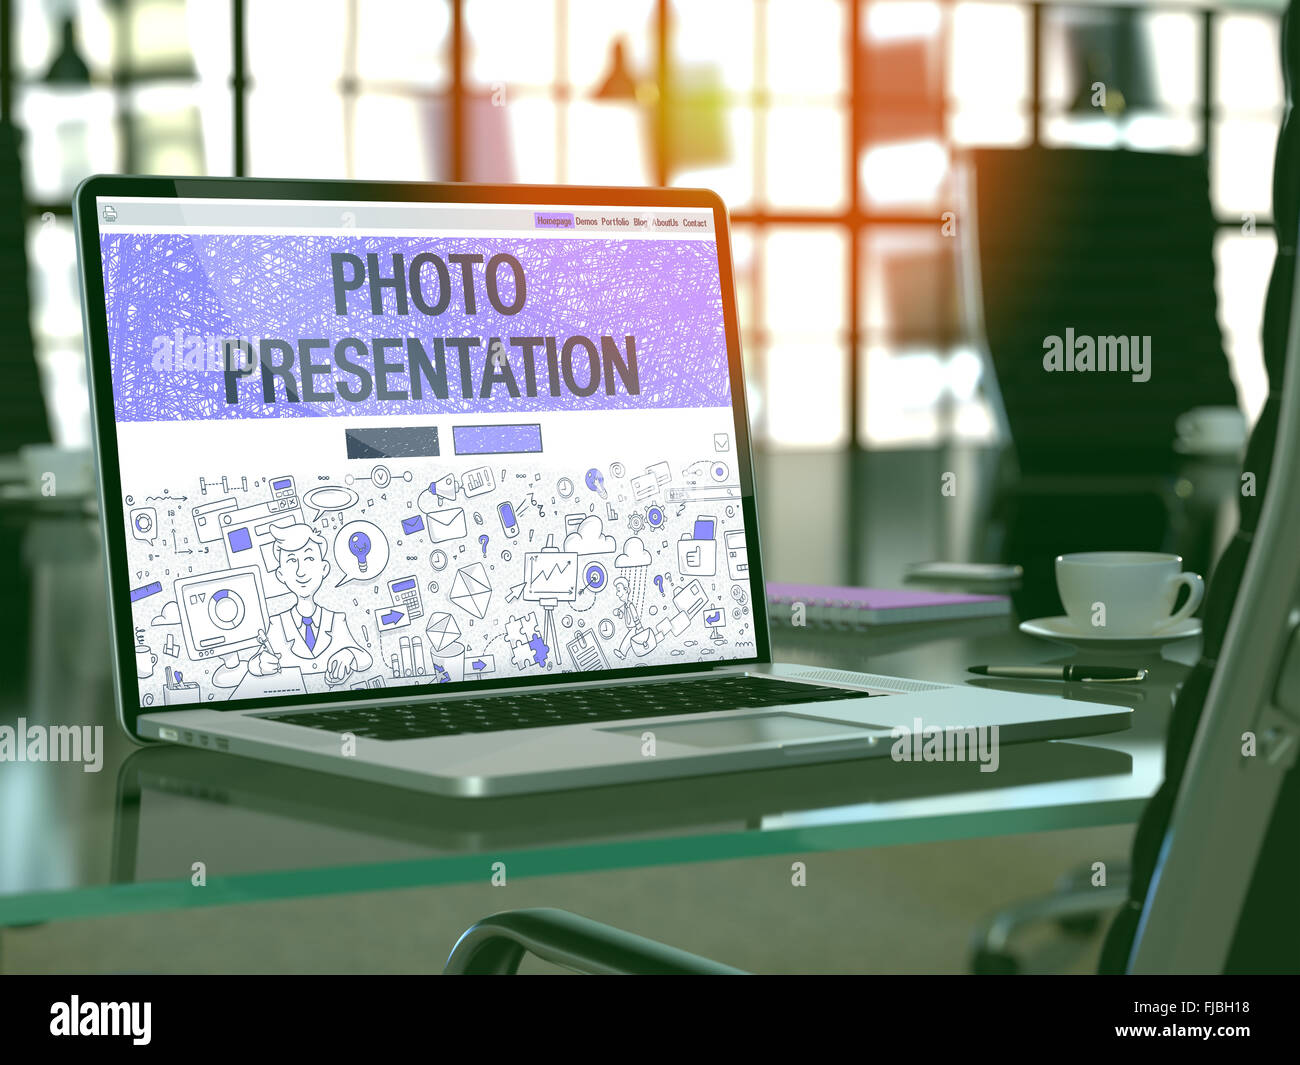 Laptop Screen with Photo Presentation Concept. Stock Photo